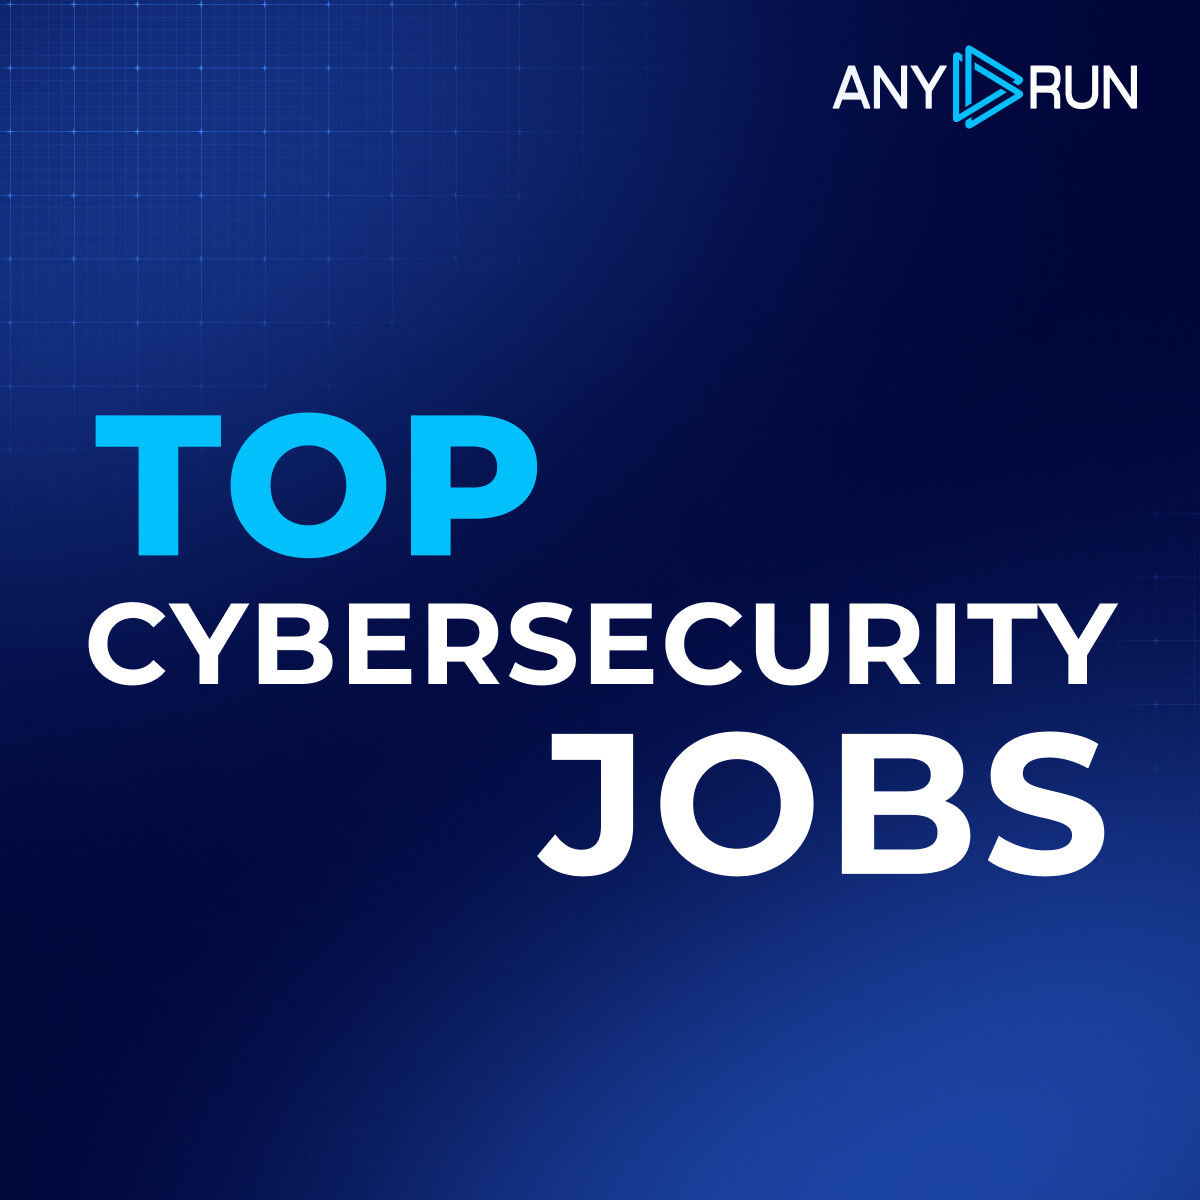 Defenders Wanted: 🔝 Top #Cybersecurity Jobs 

With rising #cyberthreats, skilled professionals are in high demand. If you're interested in a cybersecurity career, here are the top roles to consider. Let's take a look at them  🔒